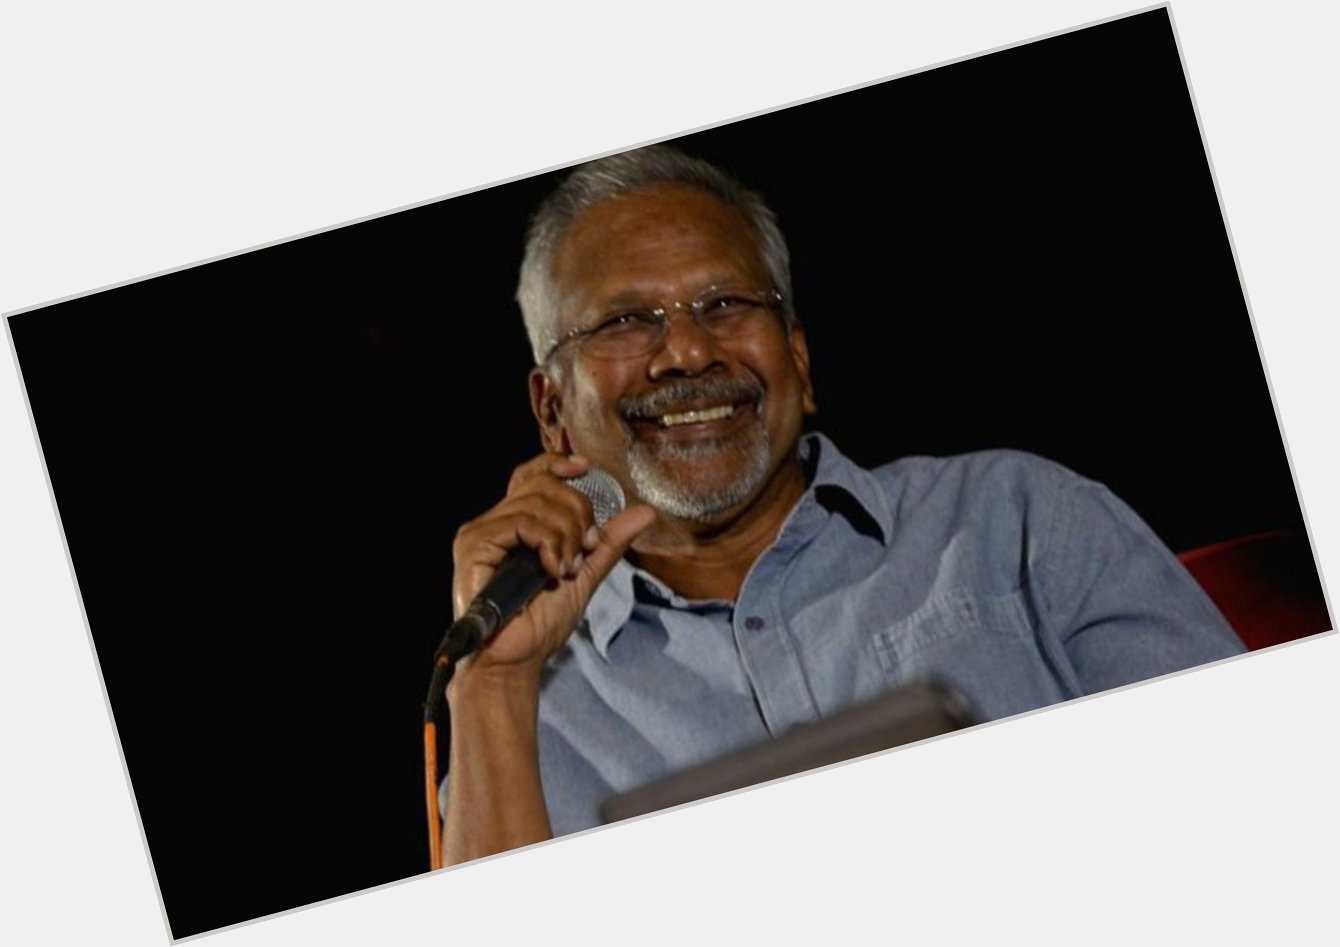 To the never outdated, movie maestro.

Happy Birthday King forever a Mani Ratnam fan. 